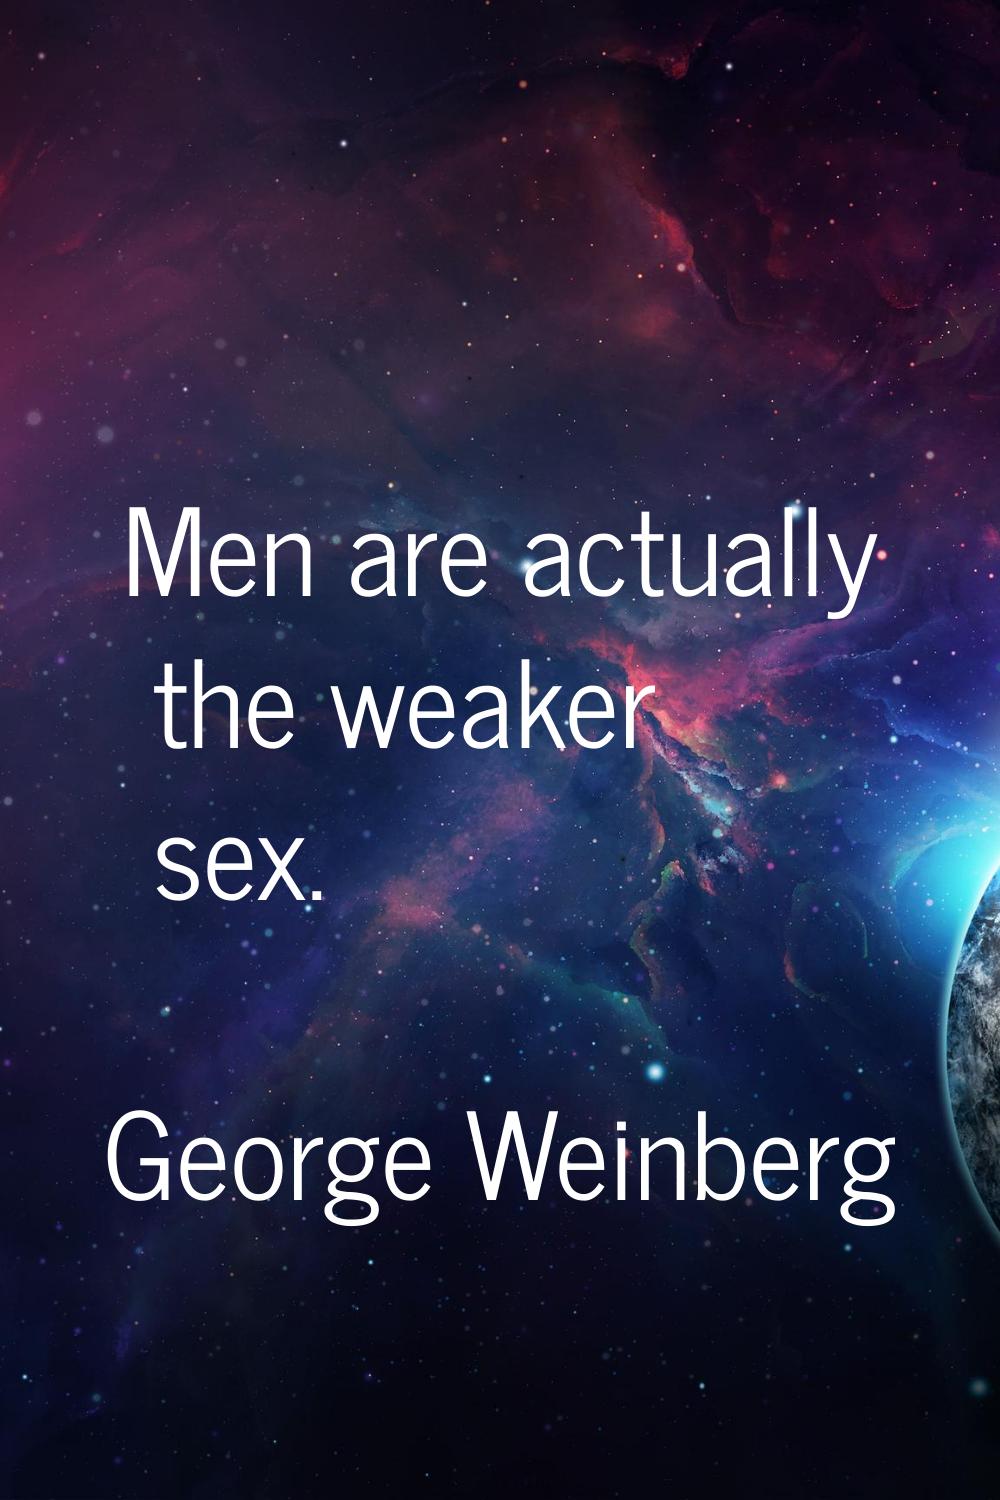 Men are actually the weaker sex.